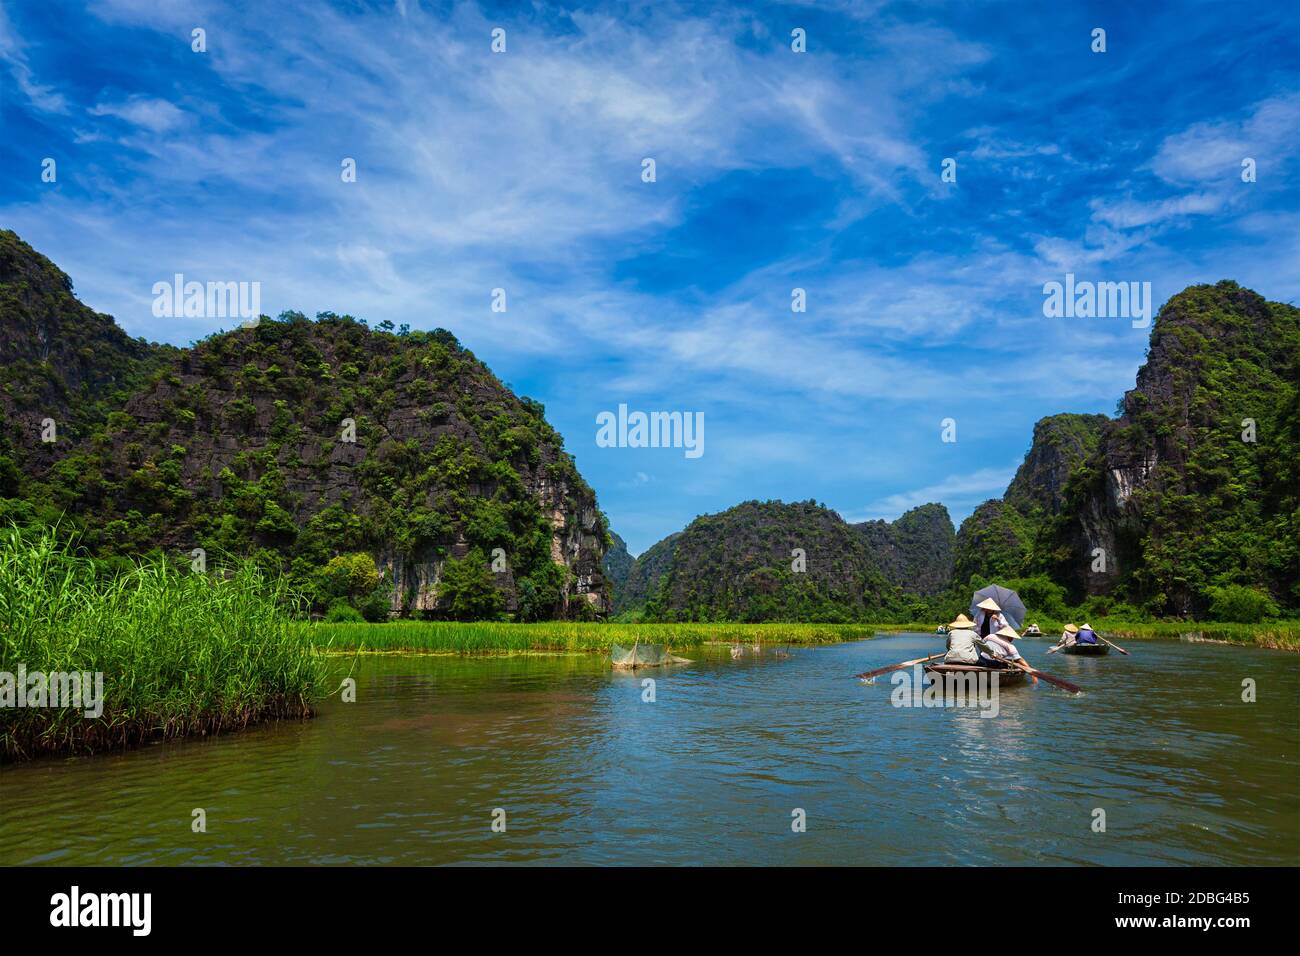 Tourists on boats in Tam Coc-Bich Dong Ngo Dong river in popular tourist destination near Ninh Binh, Vietnam Stock Photo